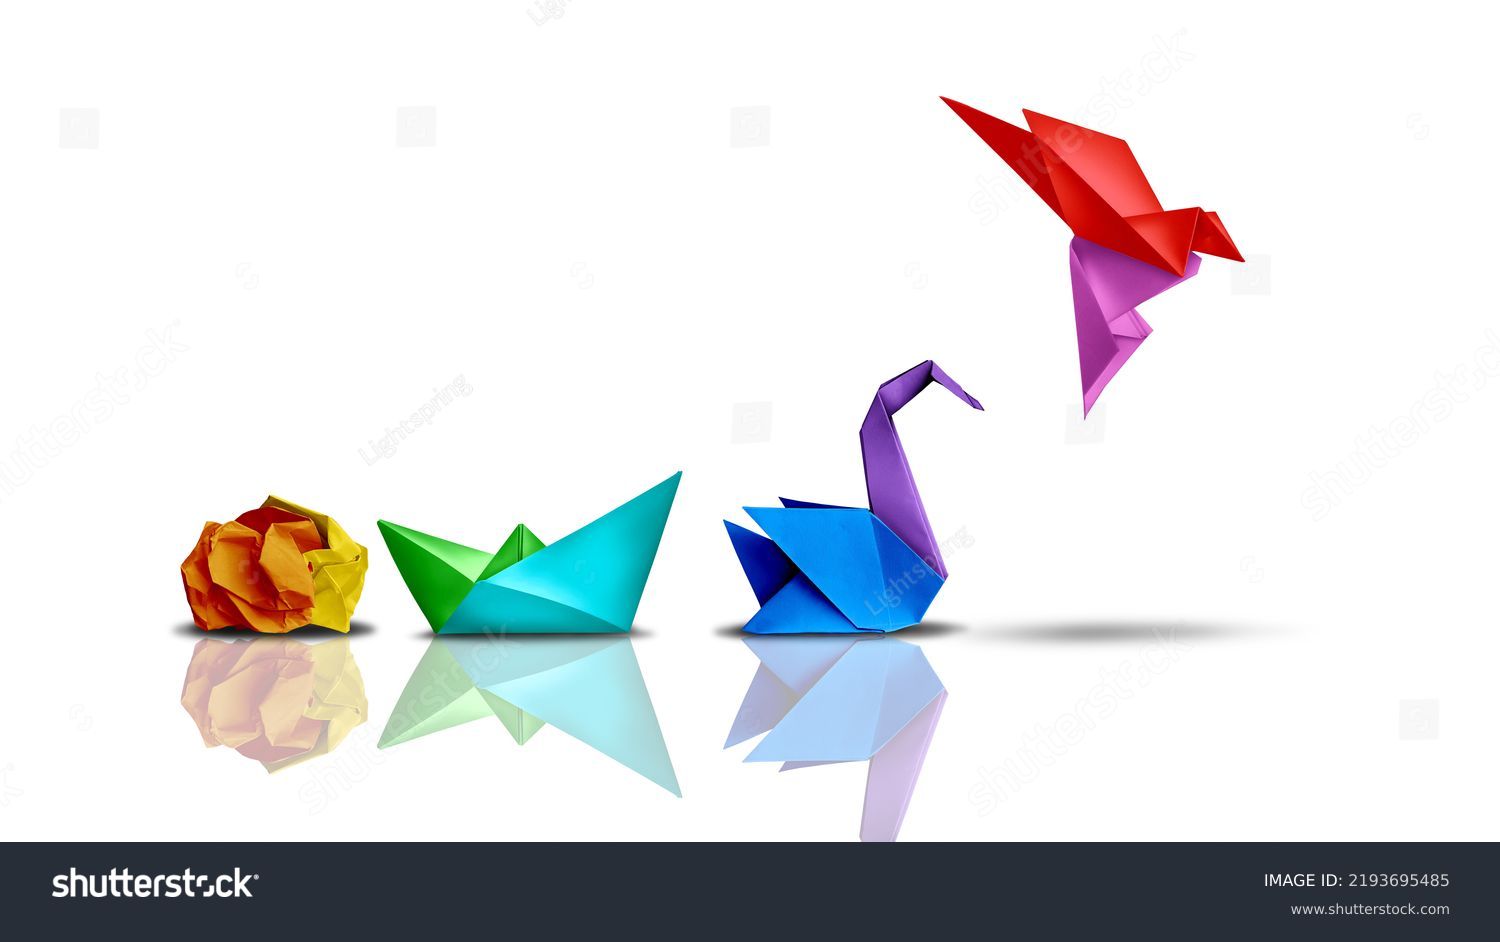 Success transformation and Transform to succeed or improving concept and leadership in business through innovation and evolution with paper origami changed for the better.  #2193695485